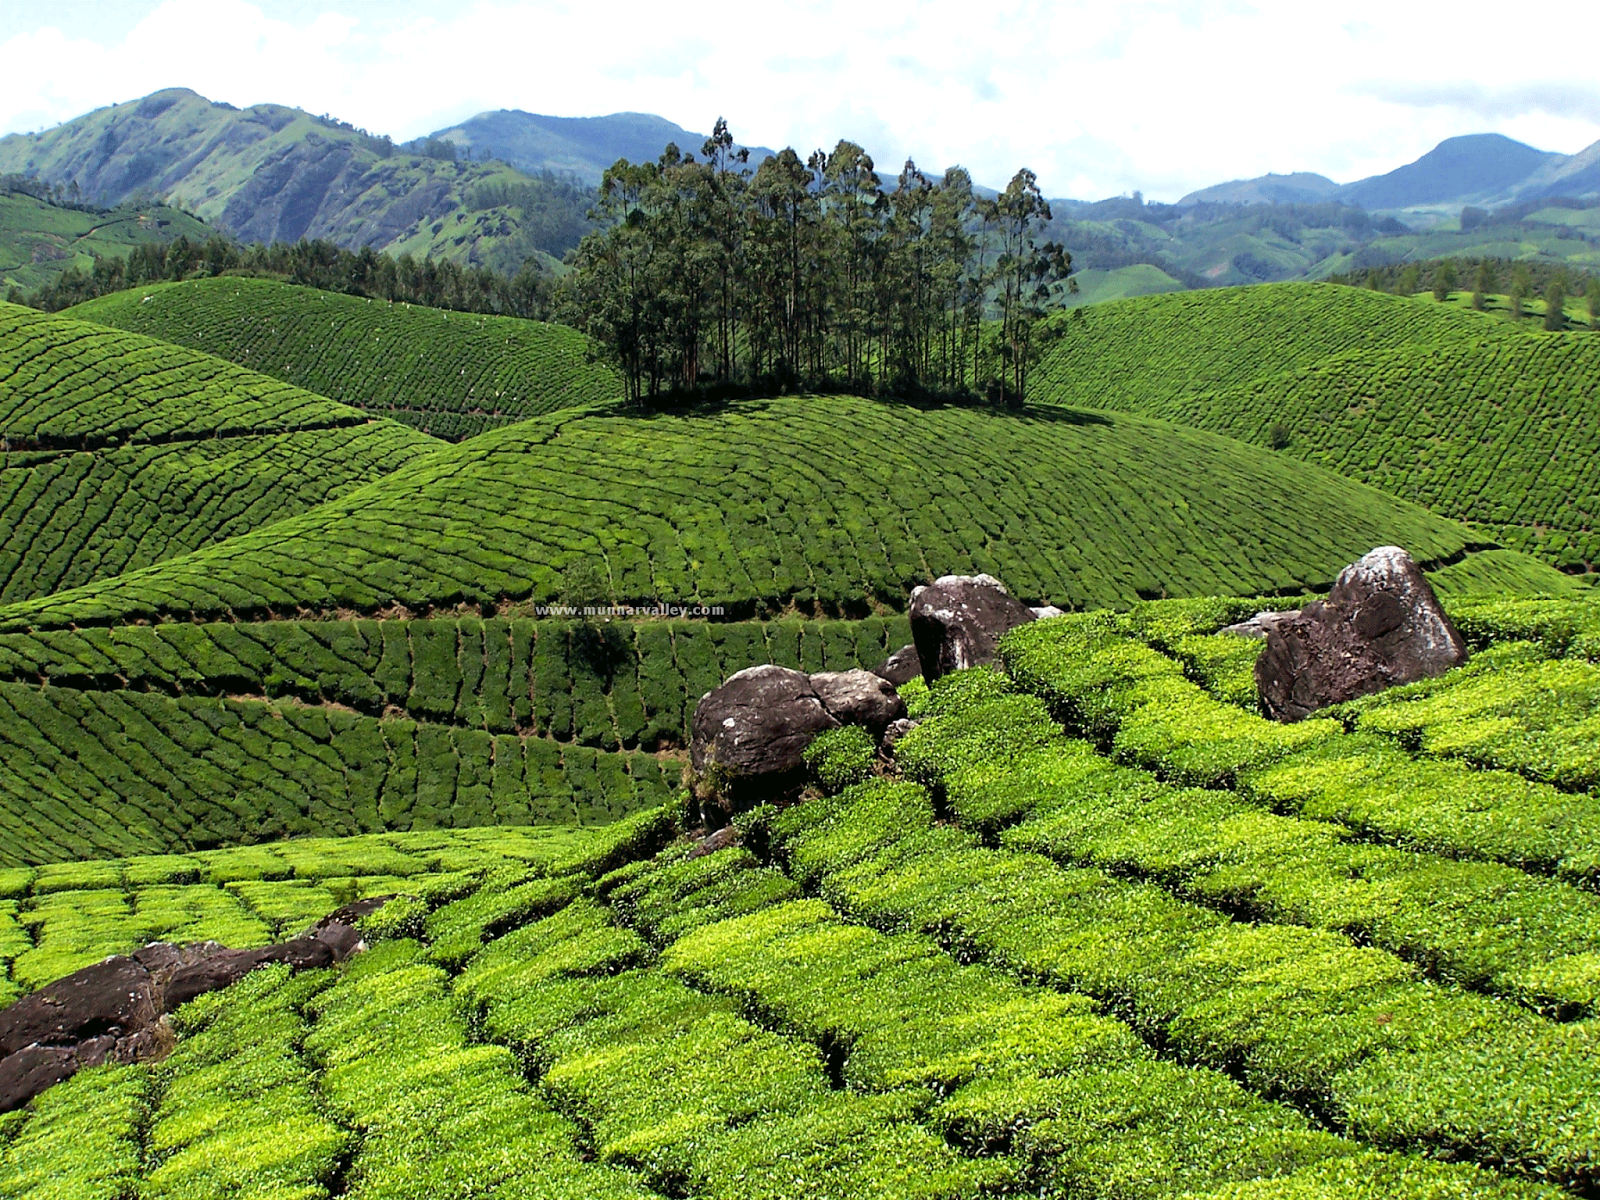 A Tourist Guide to the Beautiful Munnar